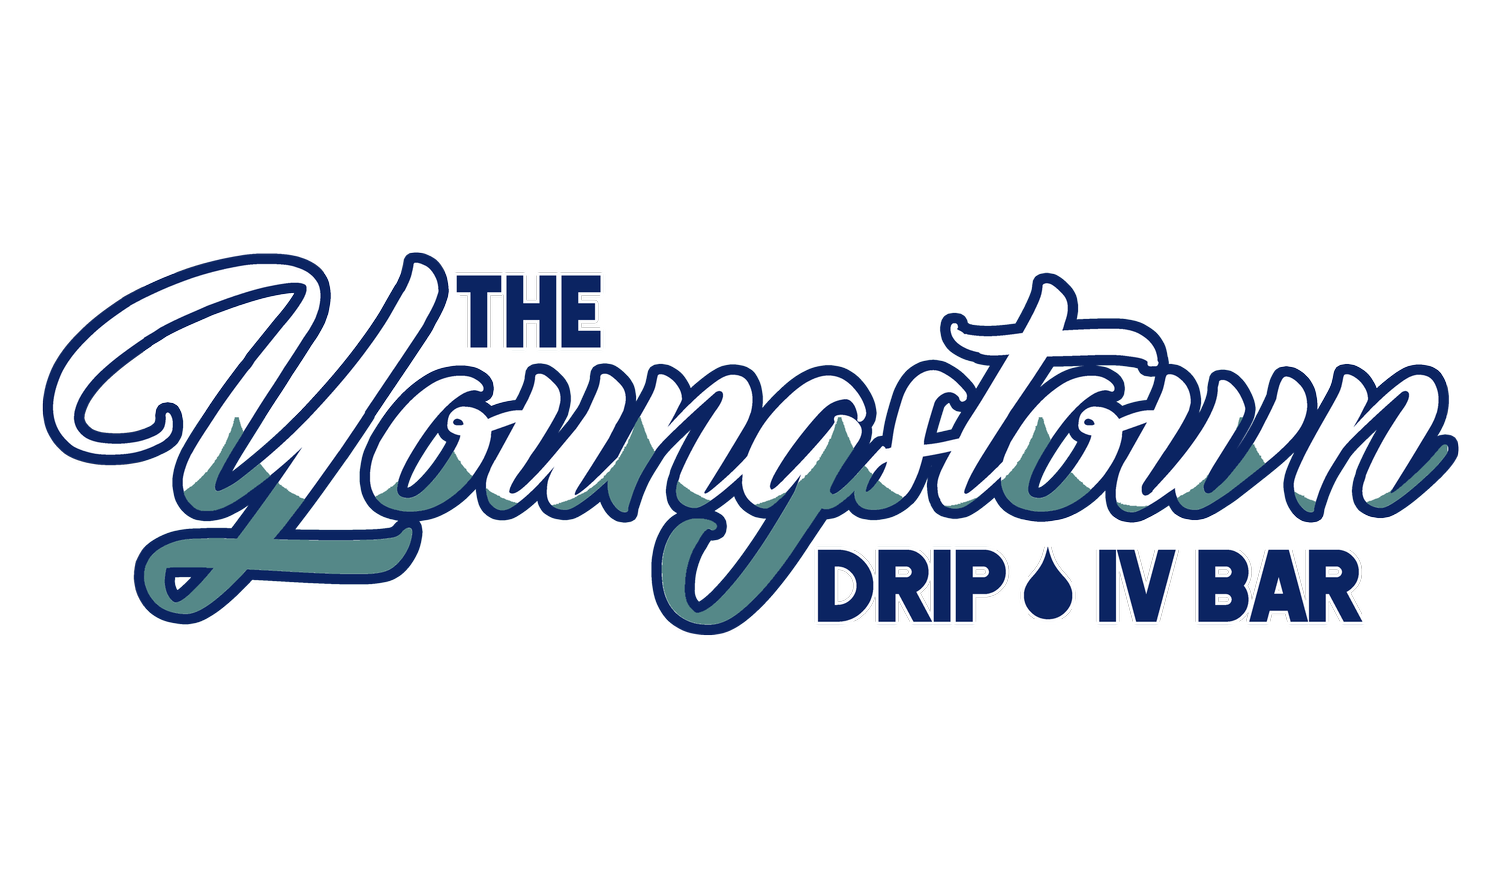 The Youngstown Drip IV Bar